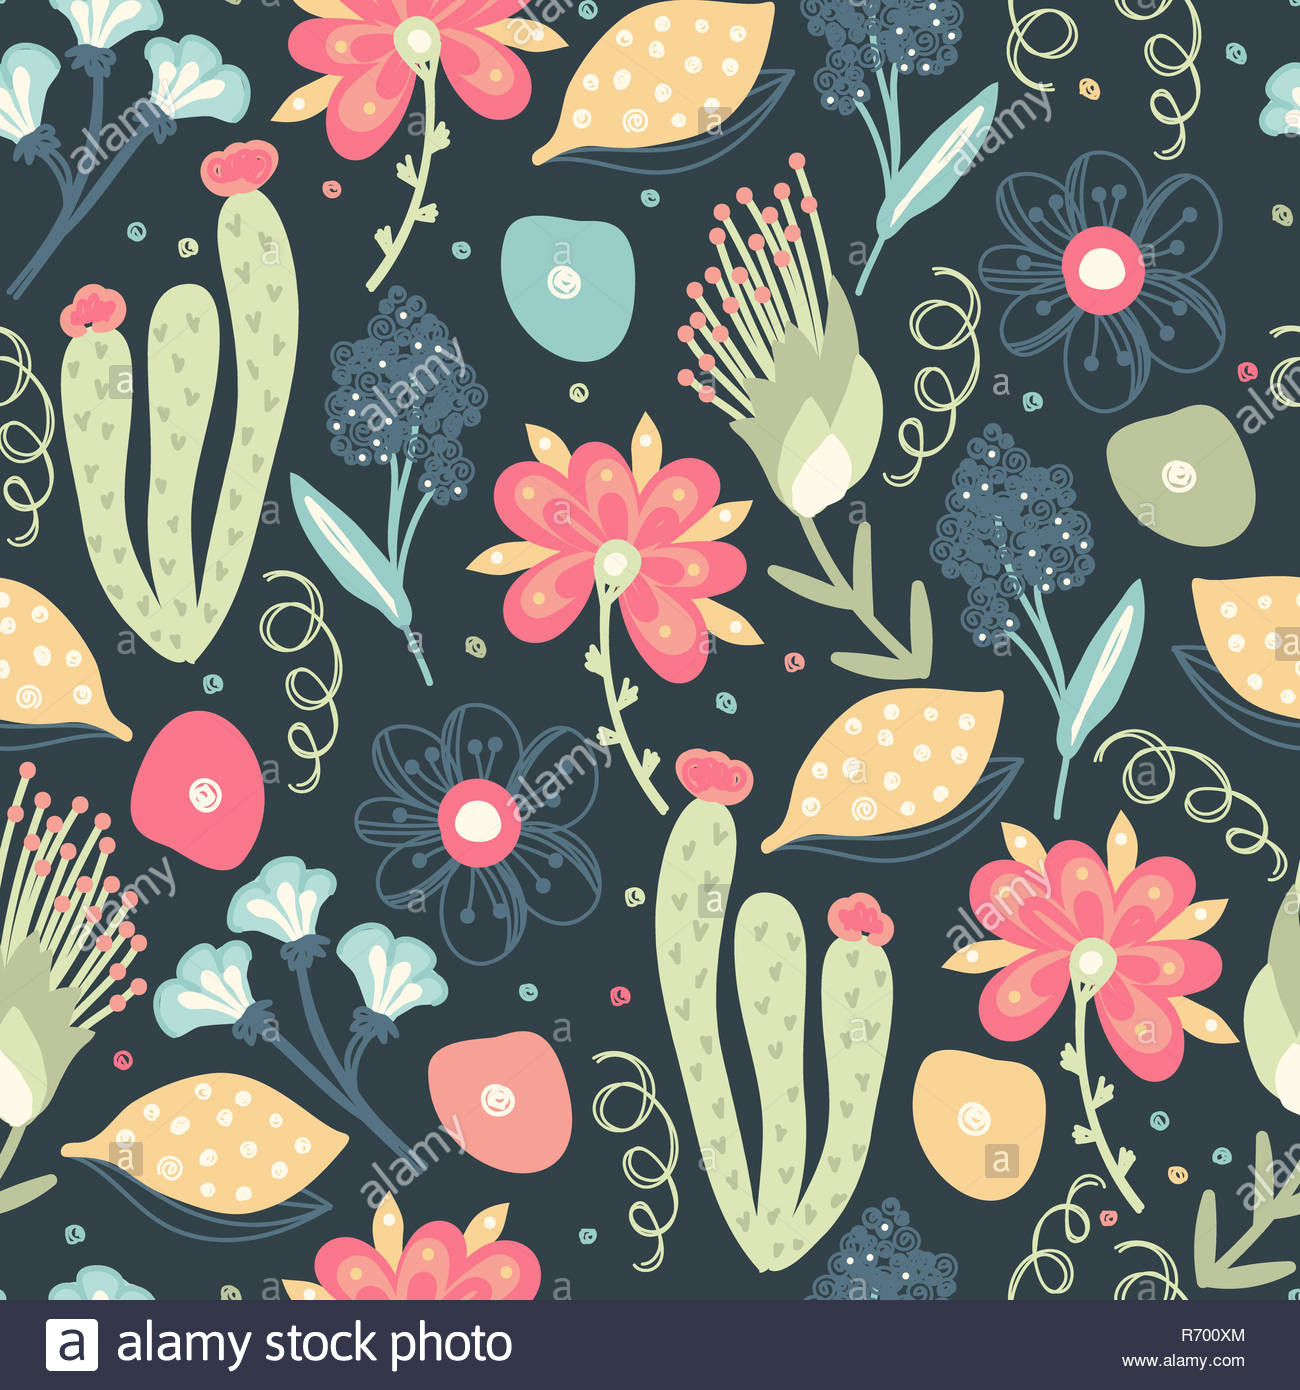 Drawings Of Flowers Abstract Floral Seamless Pattern Hand Drawn Creative Flowers Colorful